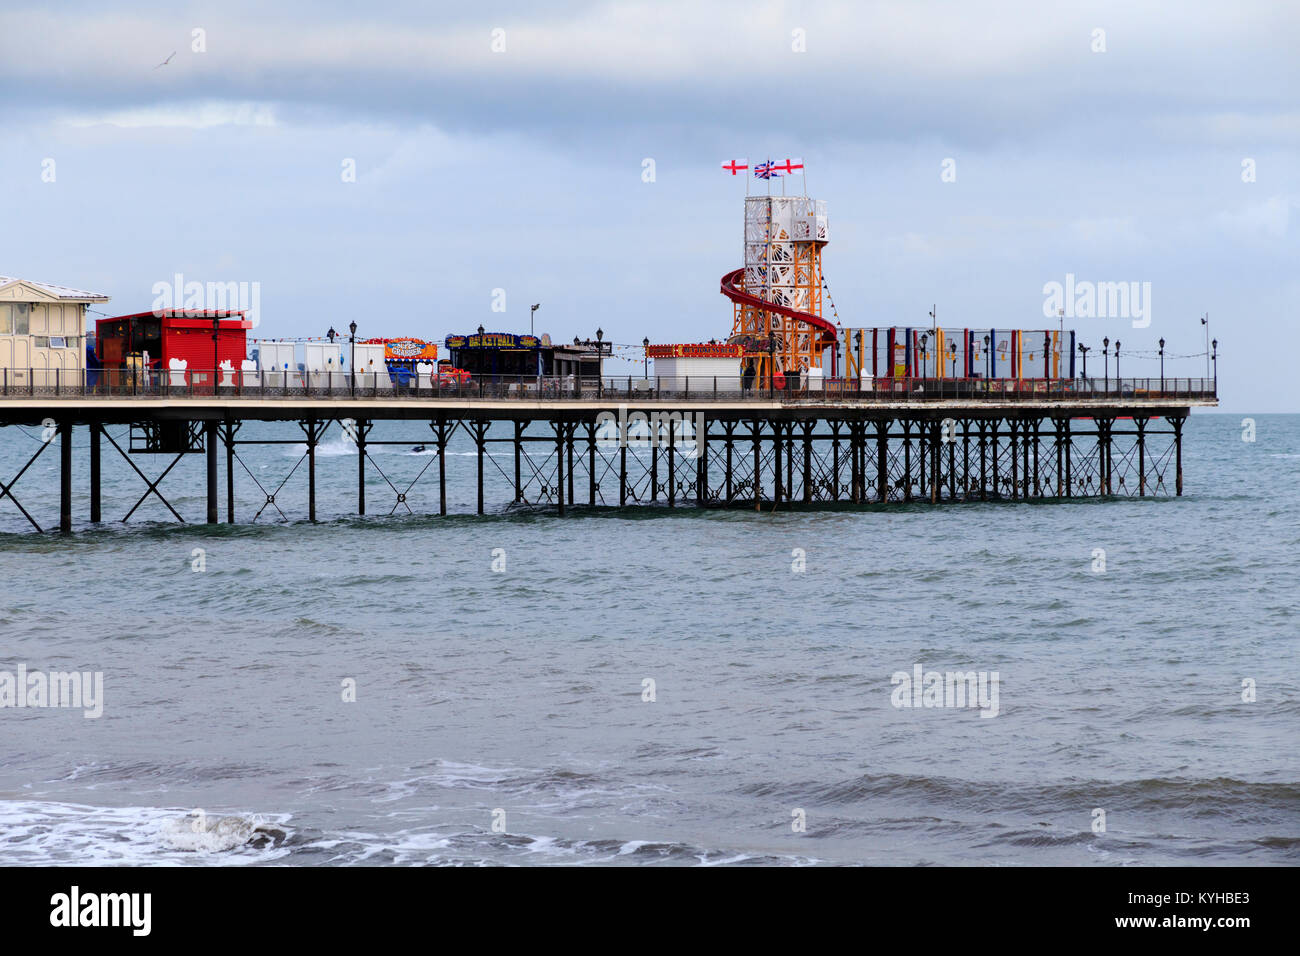 Amusements and arcades cover the length of the Victorian pier at Paignton, South Devon, UK Stock Photo